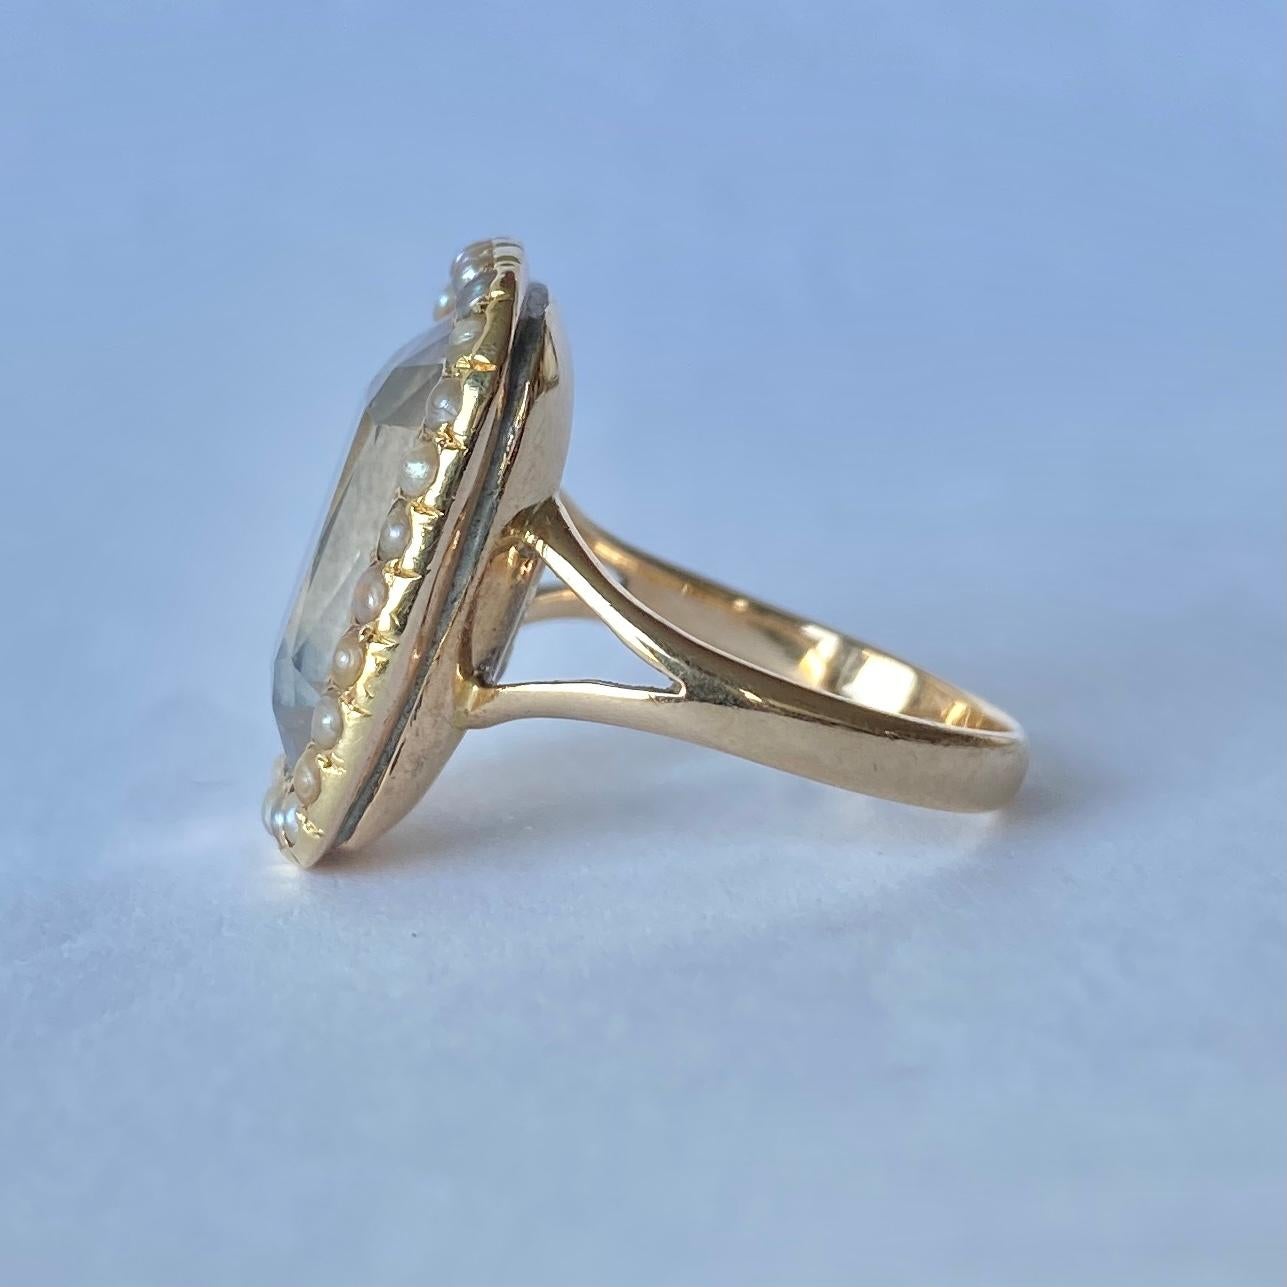 This sweet cluster ring holds a large, pale aquamarine stone and surrounding it is a halo of small pearls. This victorian ring is modelled in 15carat gold.

Ring Size: N or 6 3/4 
Cluster Dimensions: 20x16mm

Weight: 6.6g